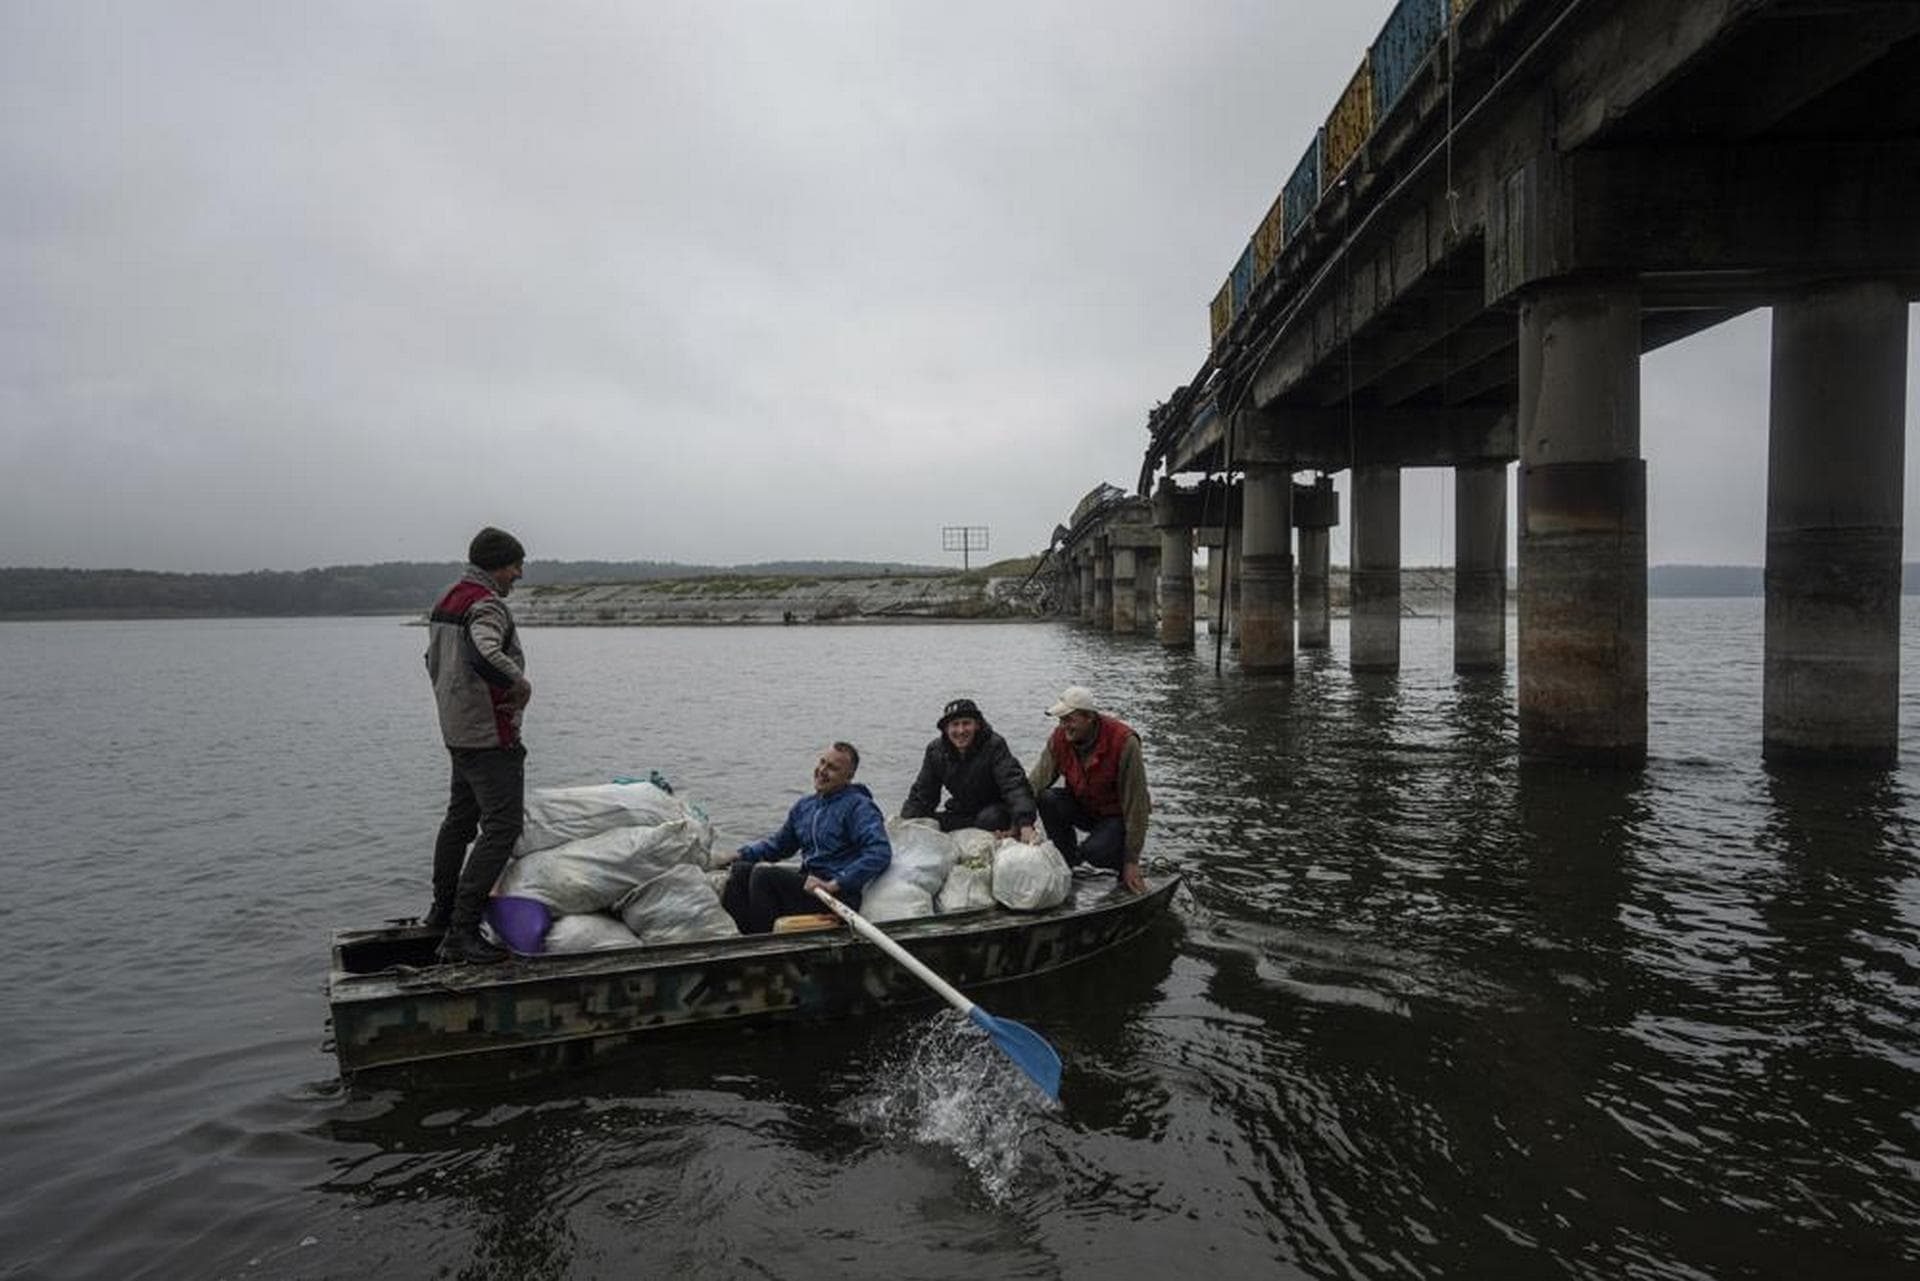 Men on a boat transport humanitarian aid across the Siverskyi-Donets river in front of a destroyed bridge in Staryi-Saltiv